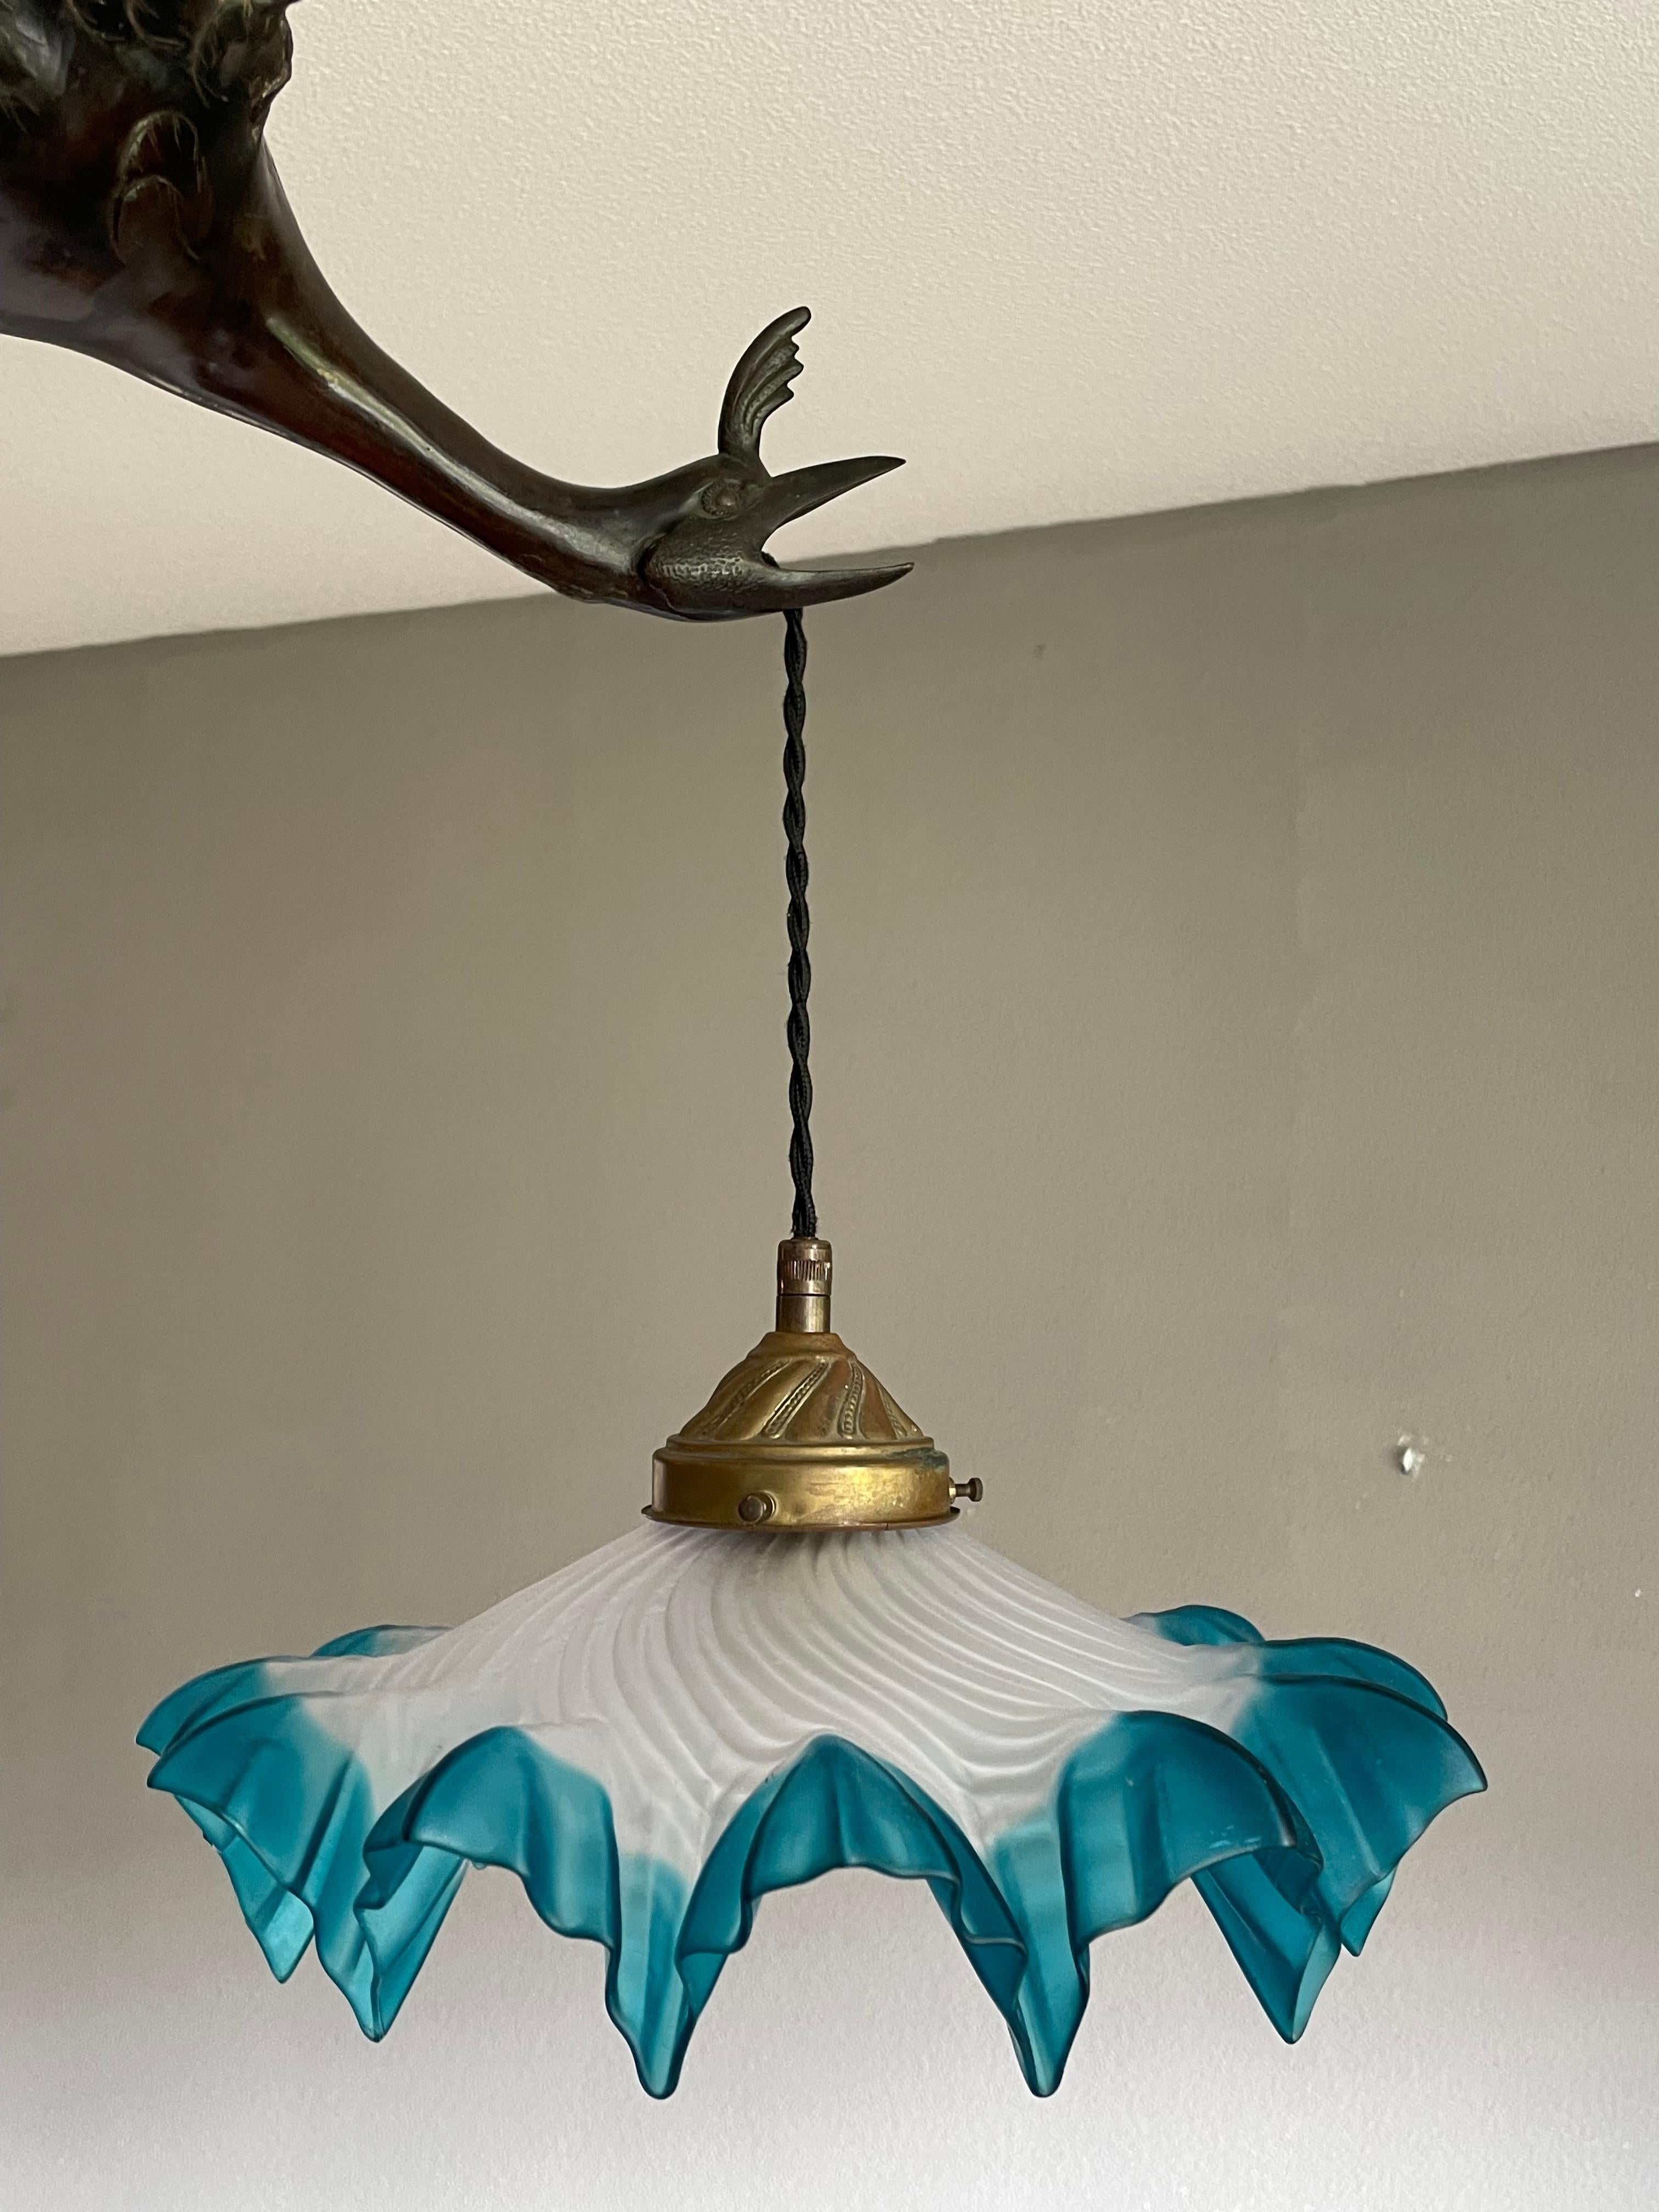 Rare and Graceful Arts and Crafts Bronze Flying Crane Bird & Glass Shade Pendant For Sale 11